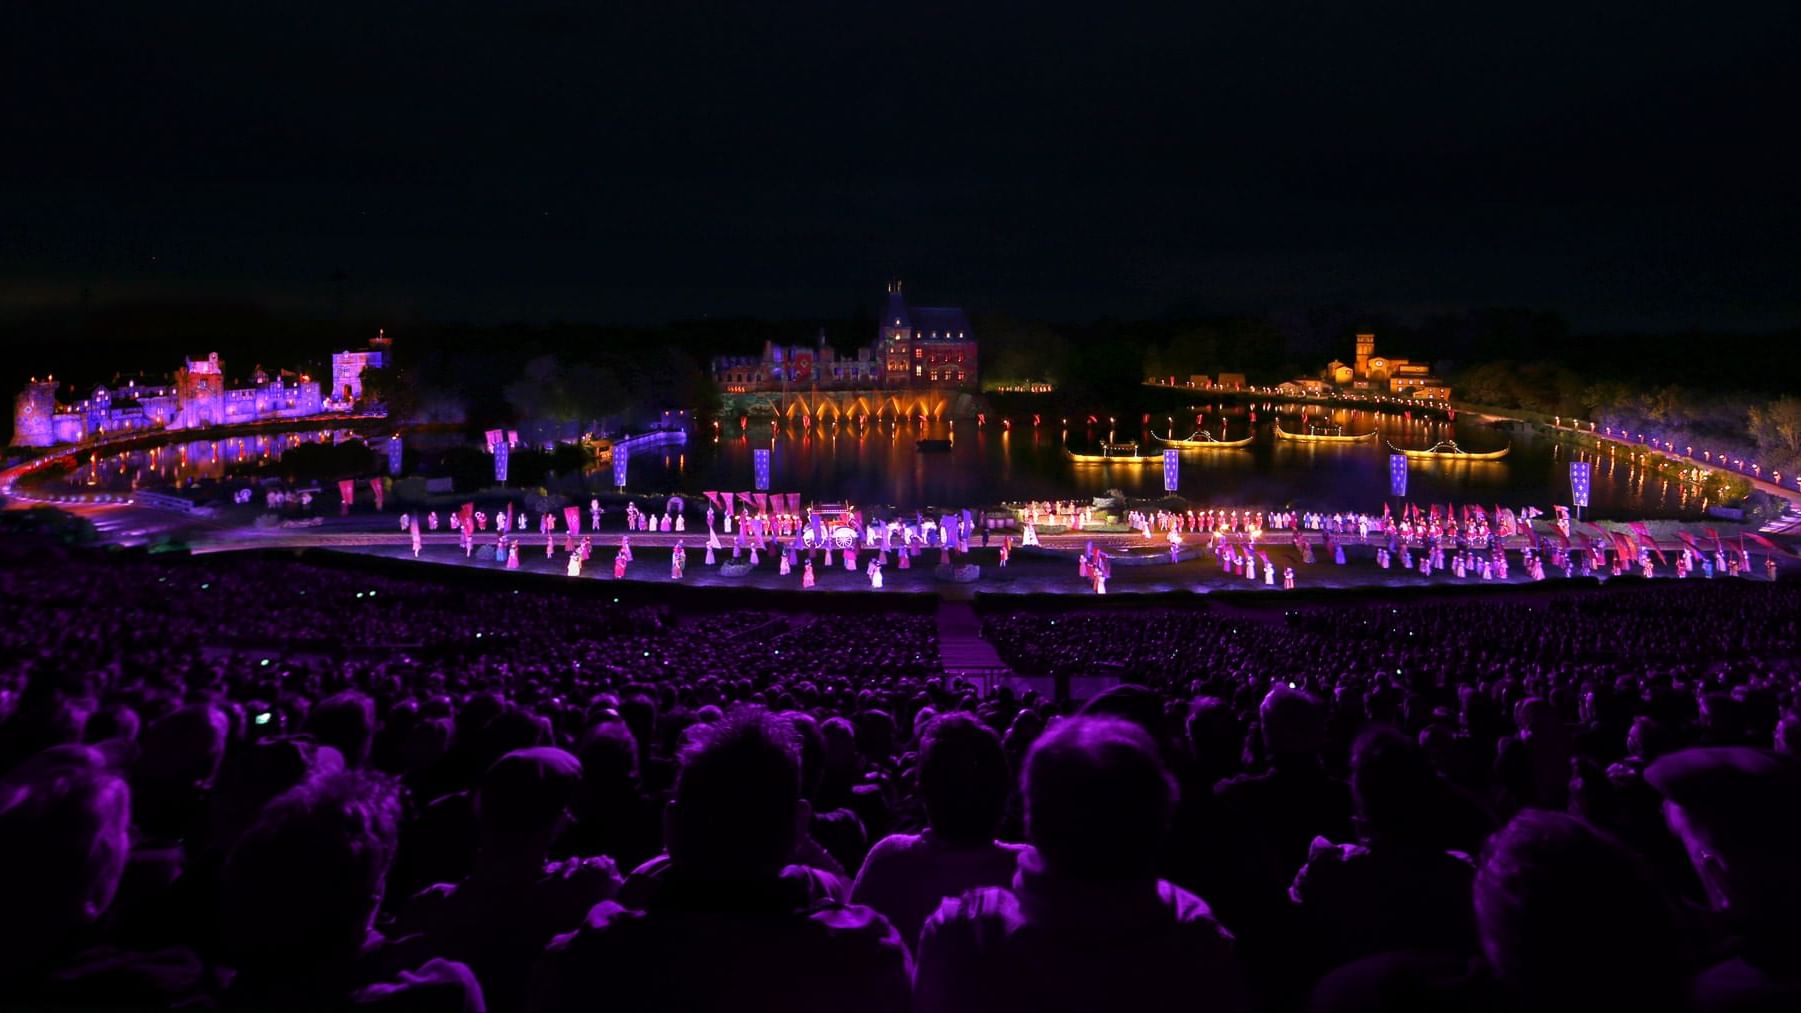 Night show at the Cinesceny Of Puy du Fou near Originals Hotels